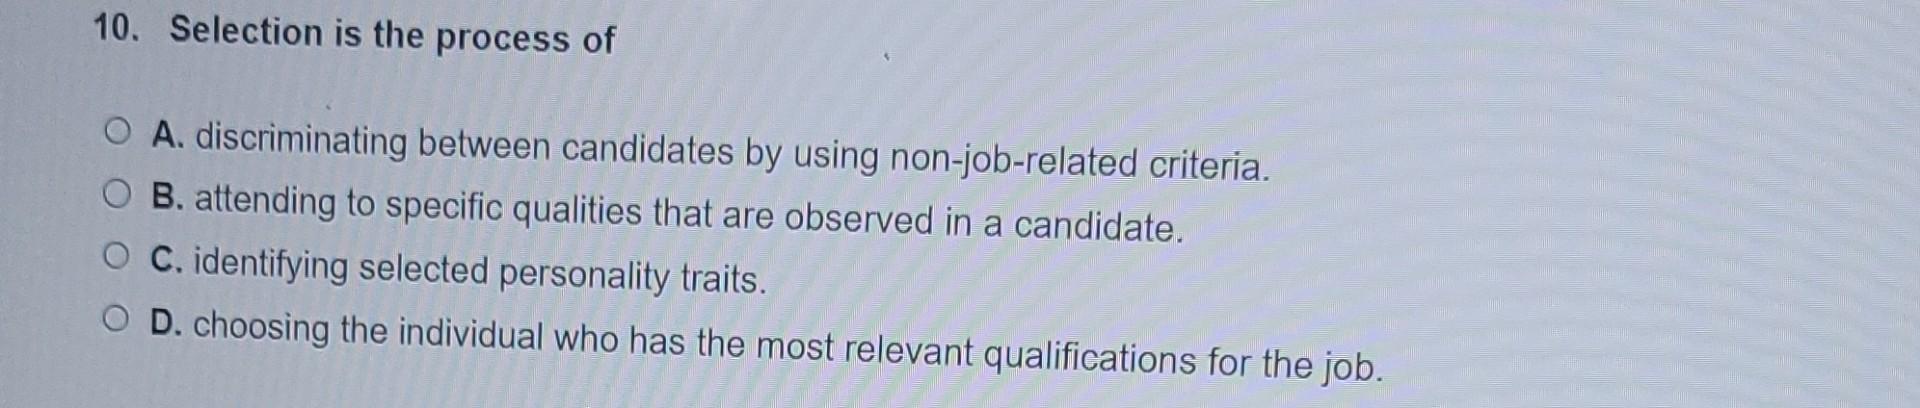 10. Selection is the process of O A. discriminating between candidates by using non-job-related criteria. OB.